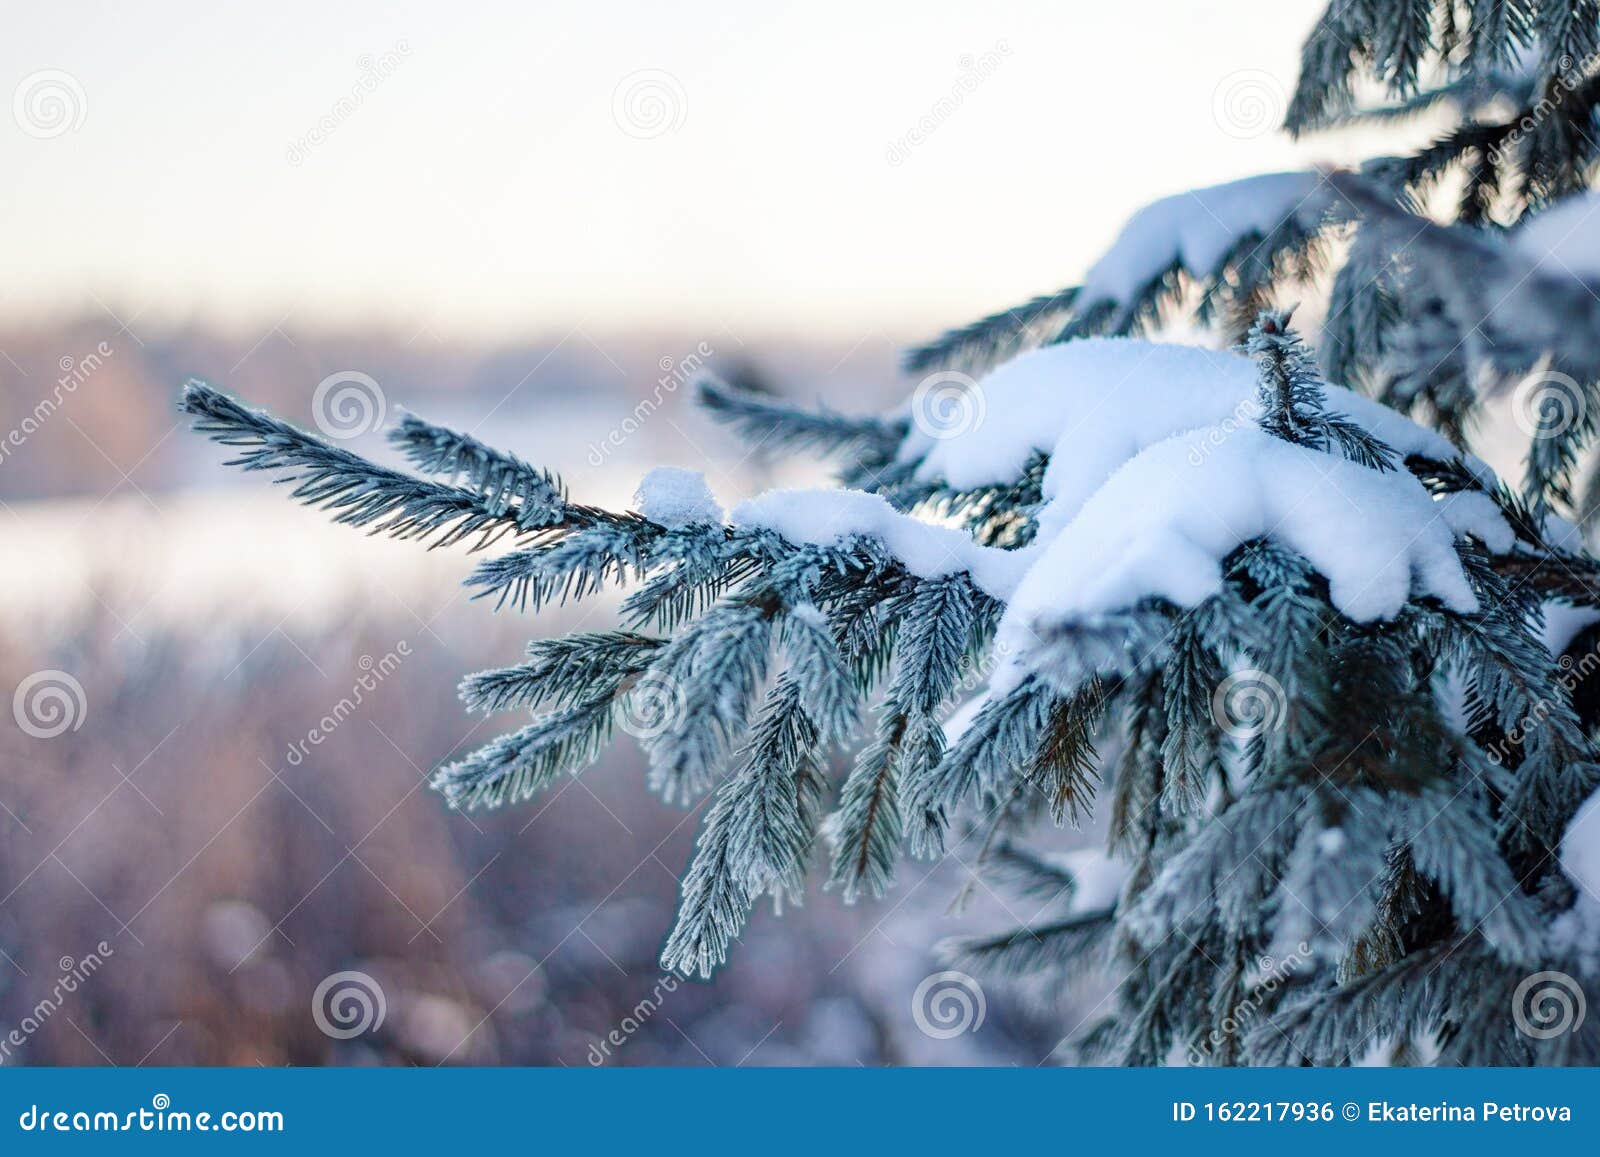 Christmas Winter Nature Background. Christmas Pine Tree Under the Snow  Wallpaper. Copy Space Stock Photo - Image of close, green: 162217936